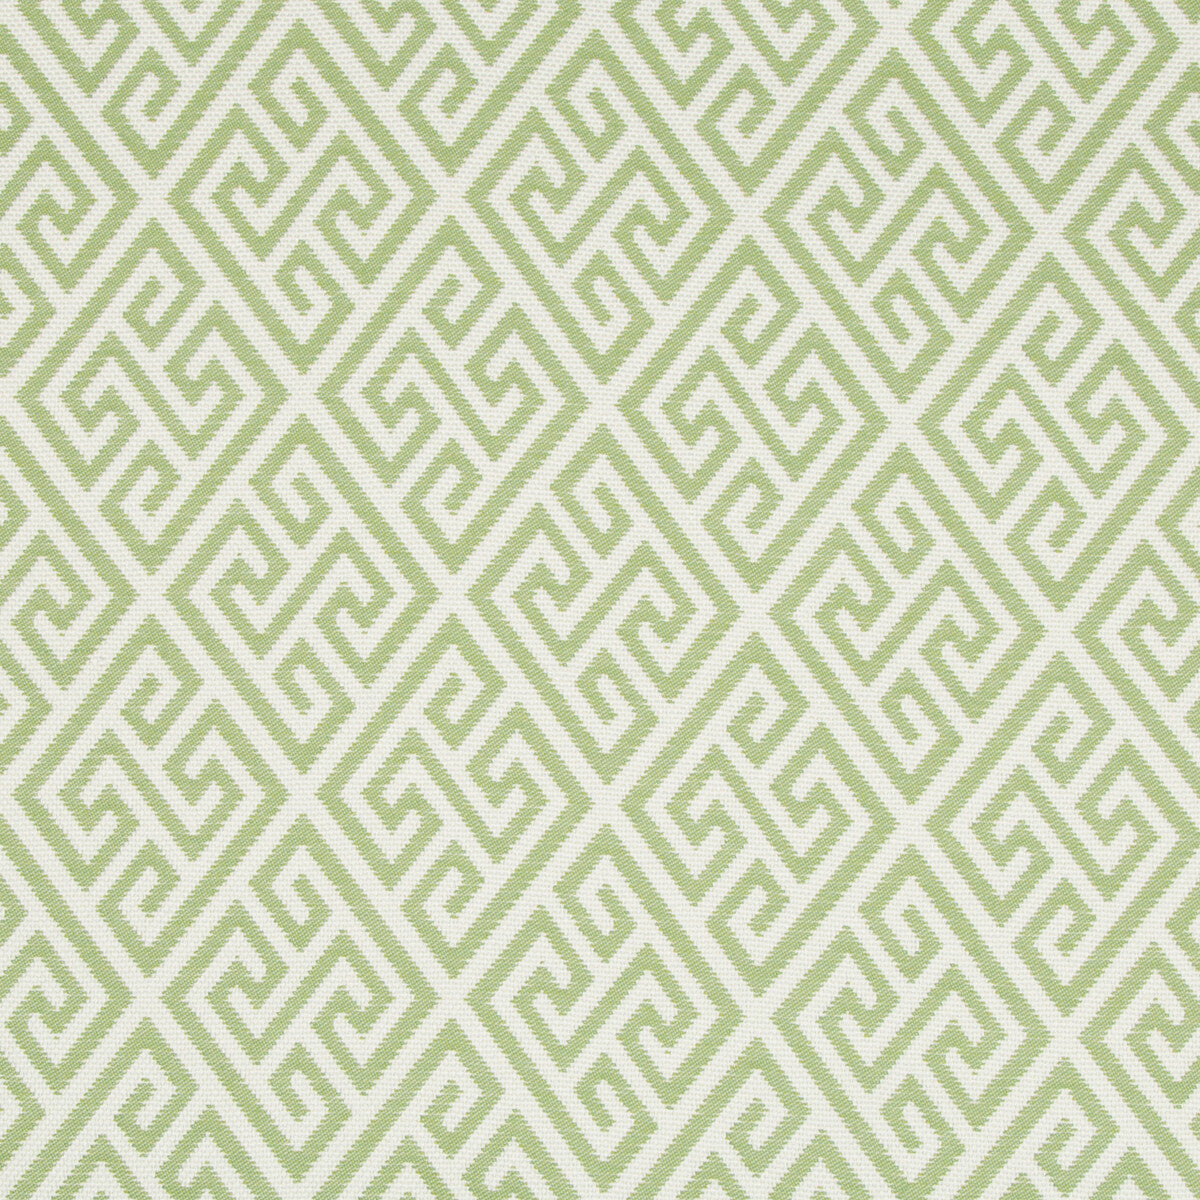 Cap Martin Woven fabric in kiwi color - pattern 8017150.3.0 - by Brunschwig &amp; Fils in the En Vacances collection